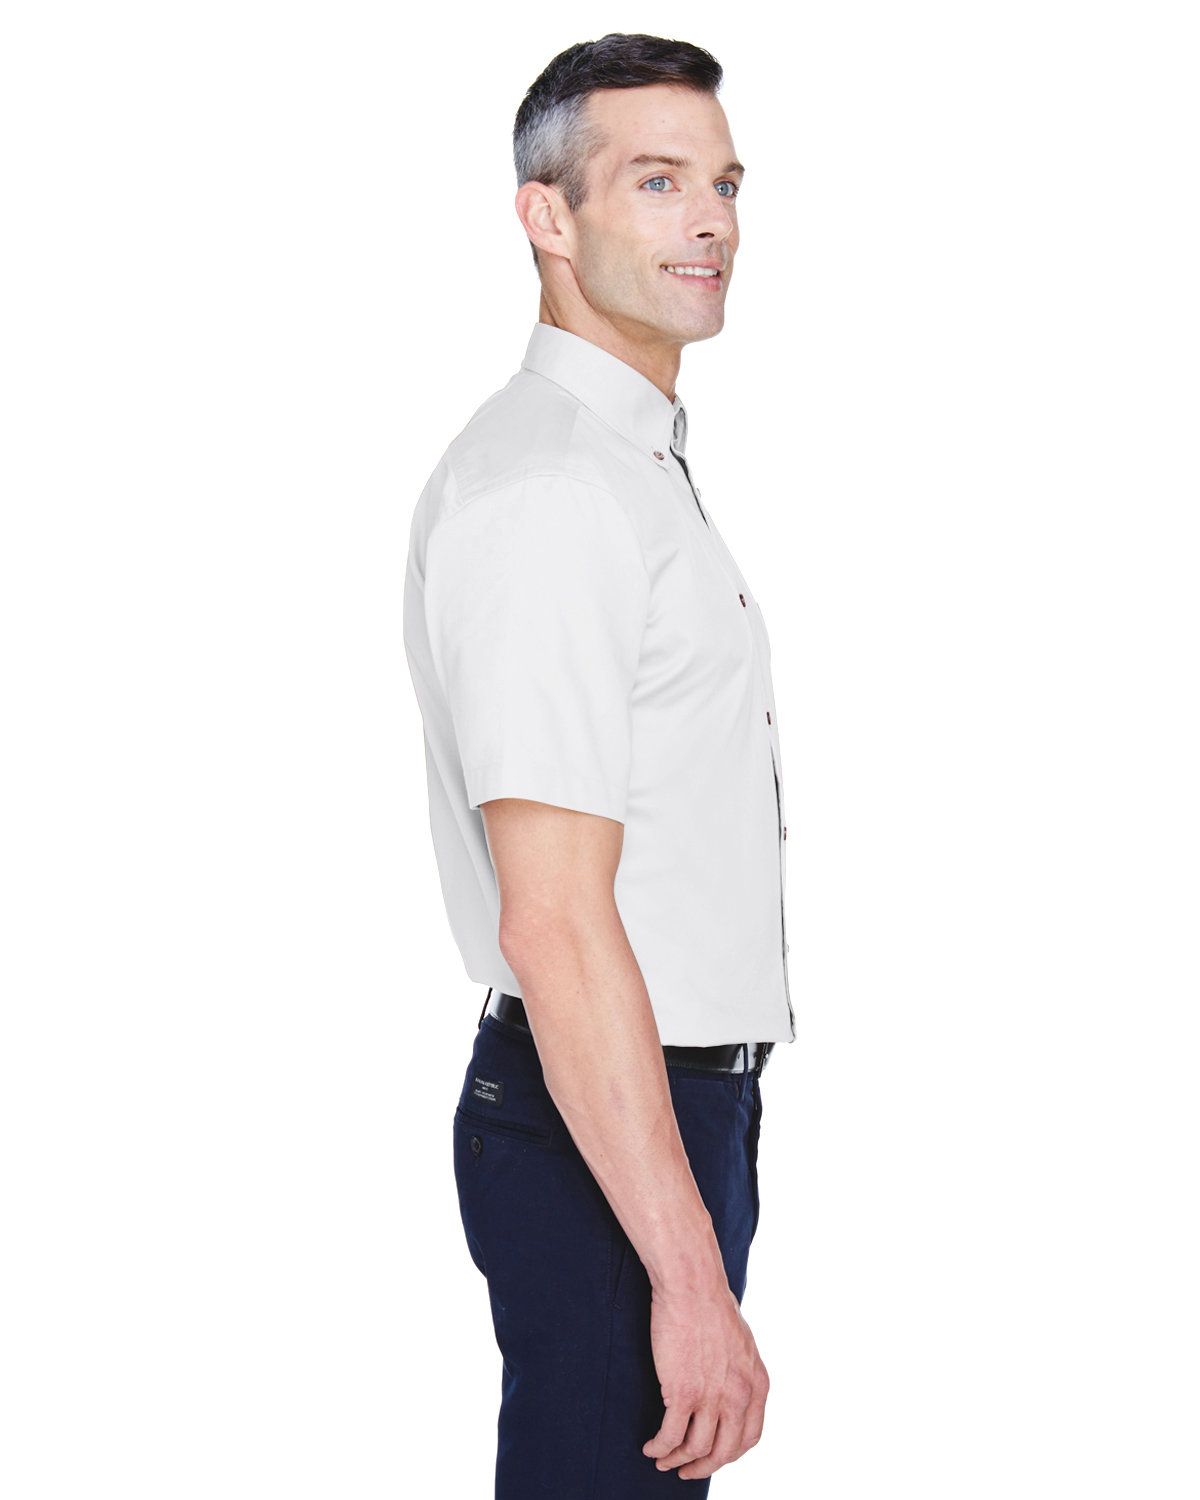 'Harriton M500S Men's Easy Blend Short-Sleeve Twill Shirt with Stain-Release'